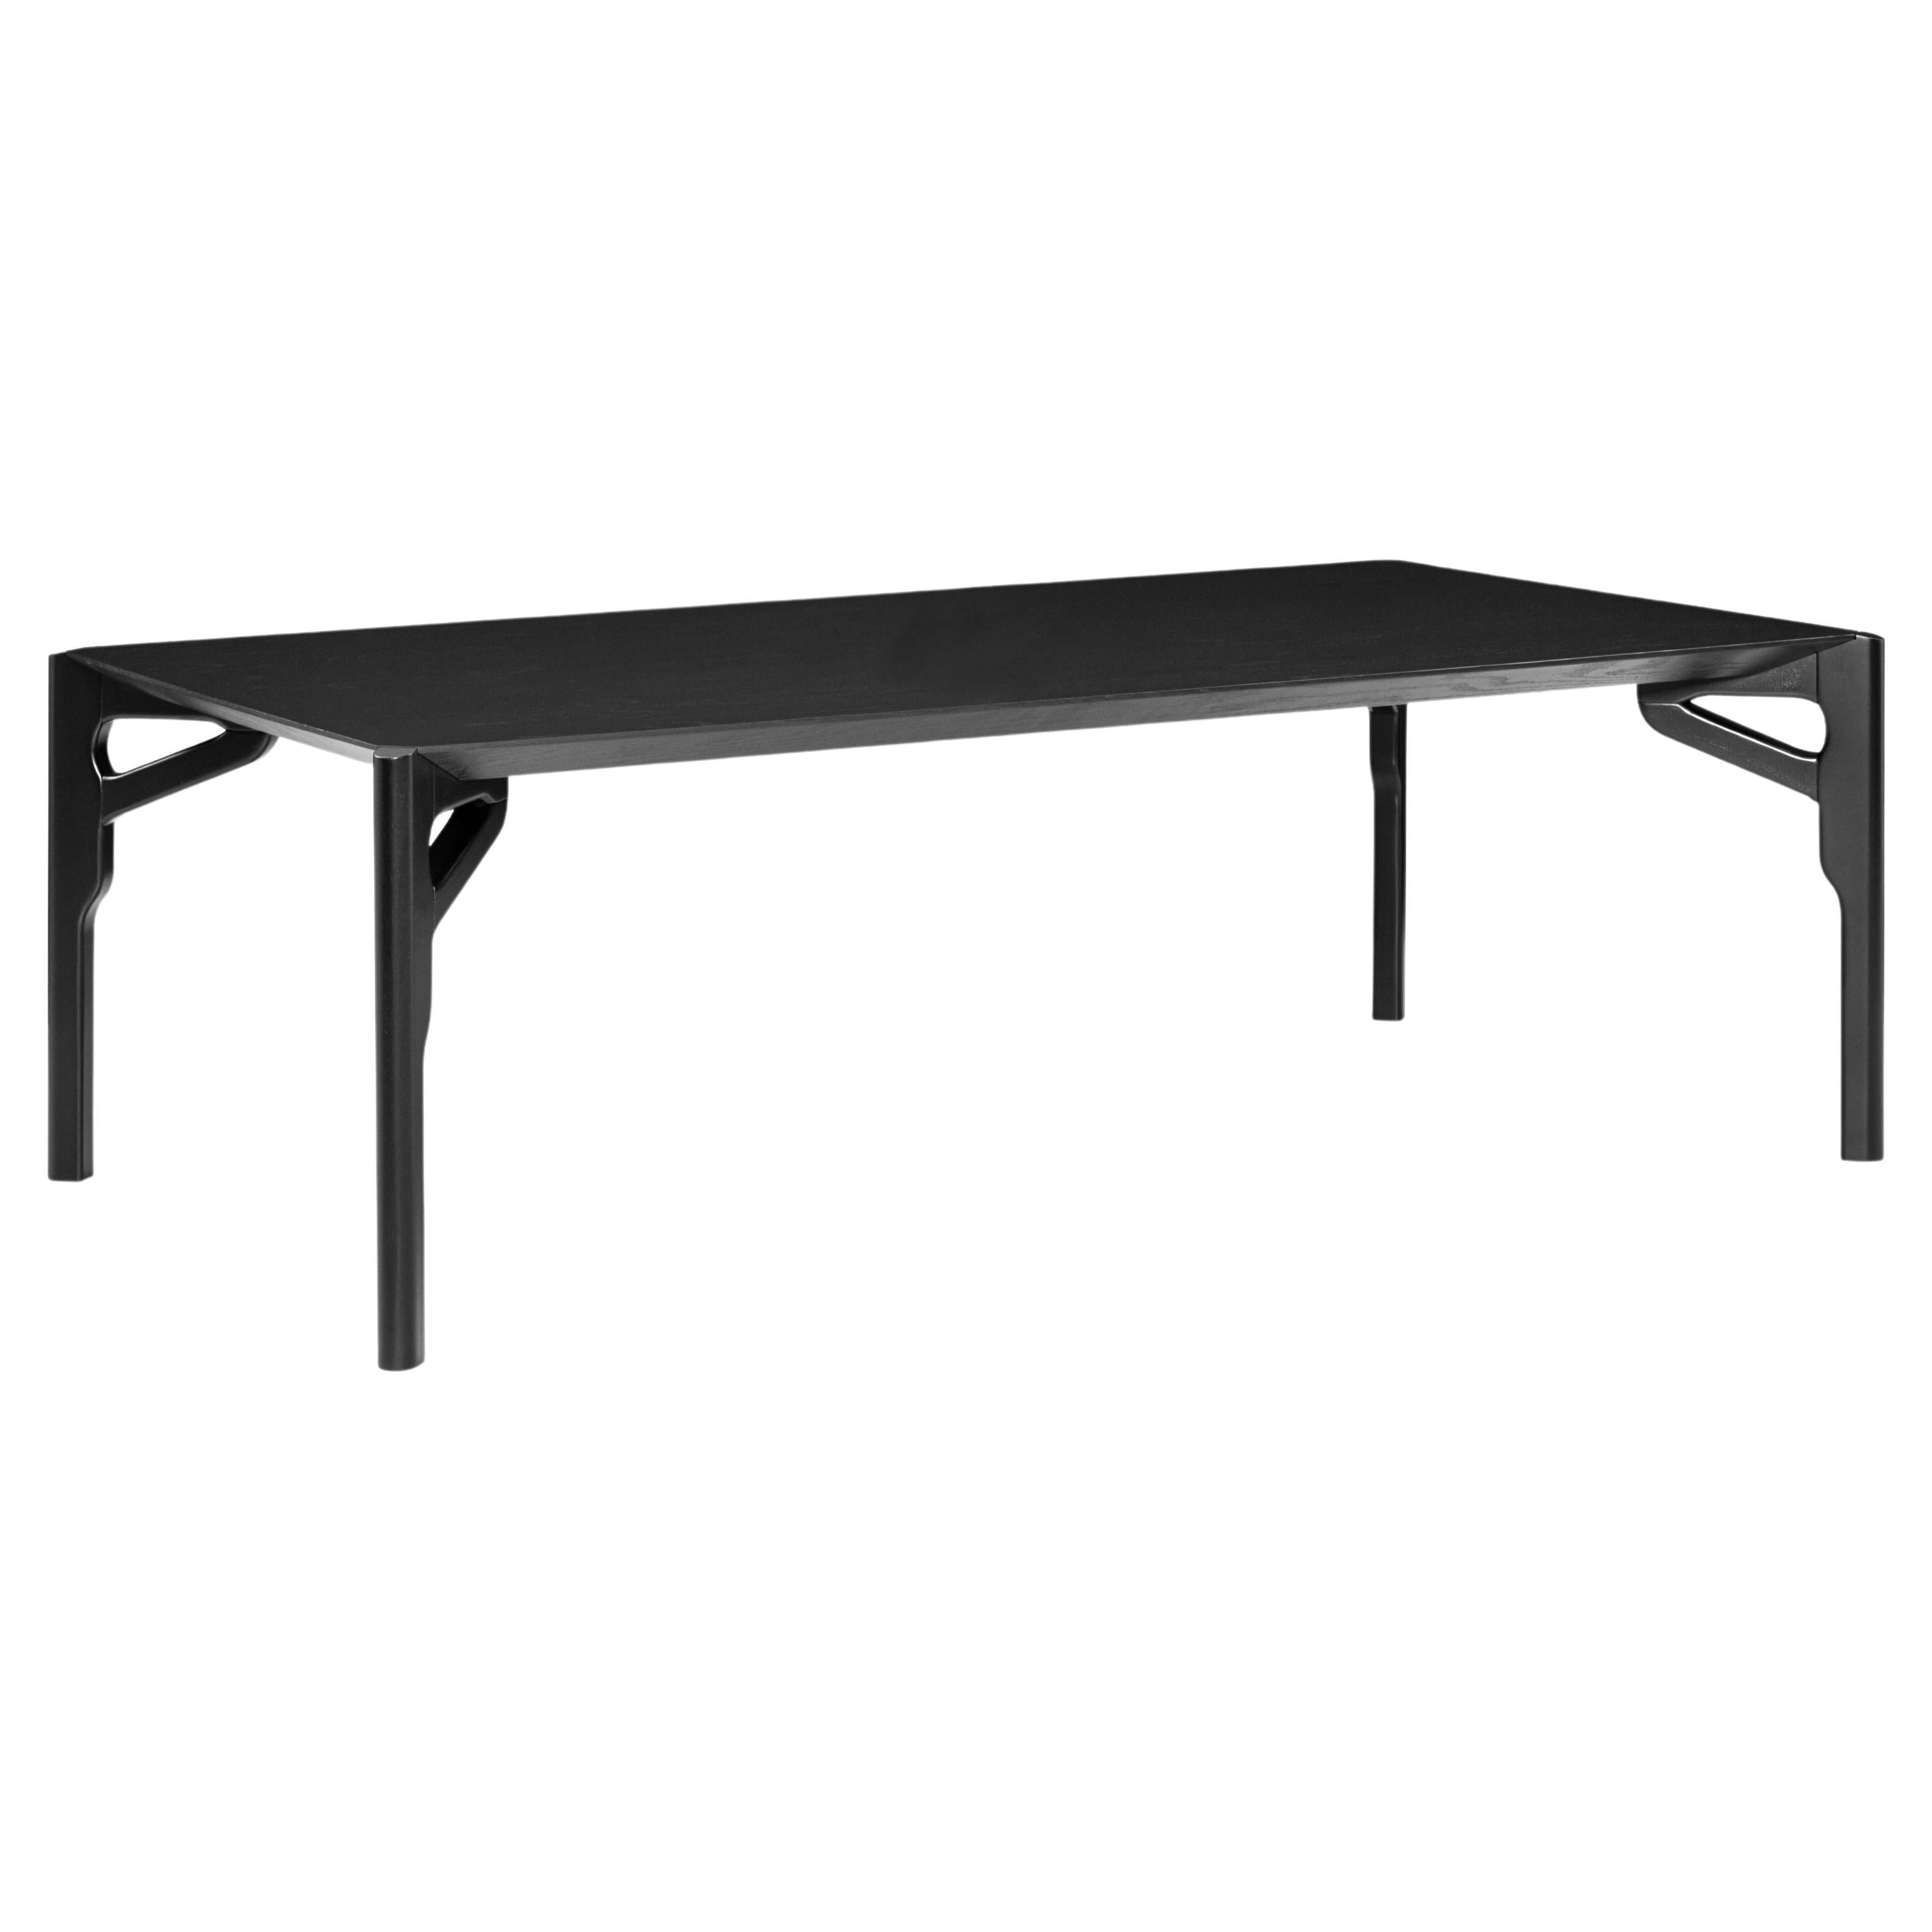 Hawk Dining Table with a Black Oak Wood Finish Table Top 86'' For Sale